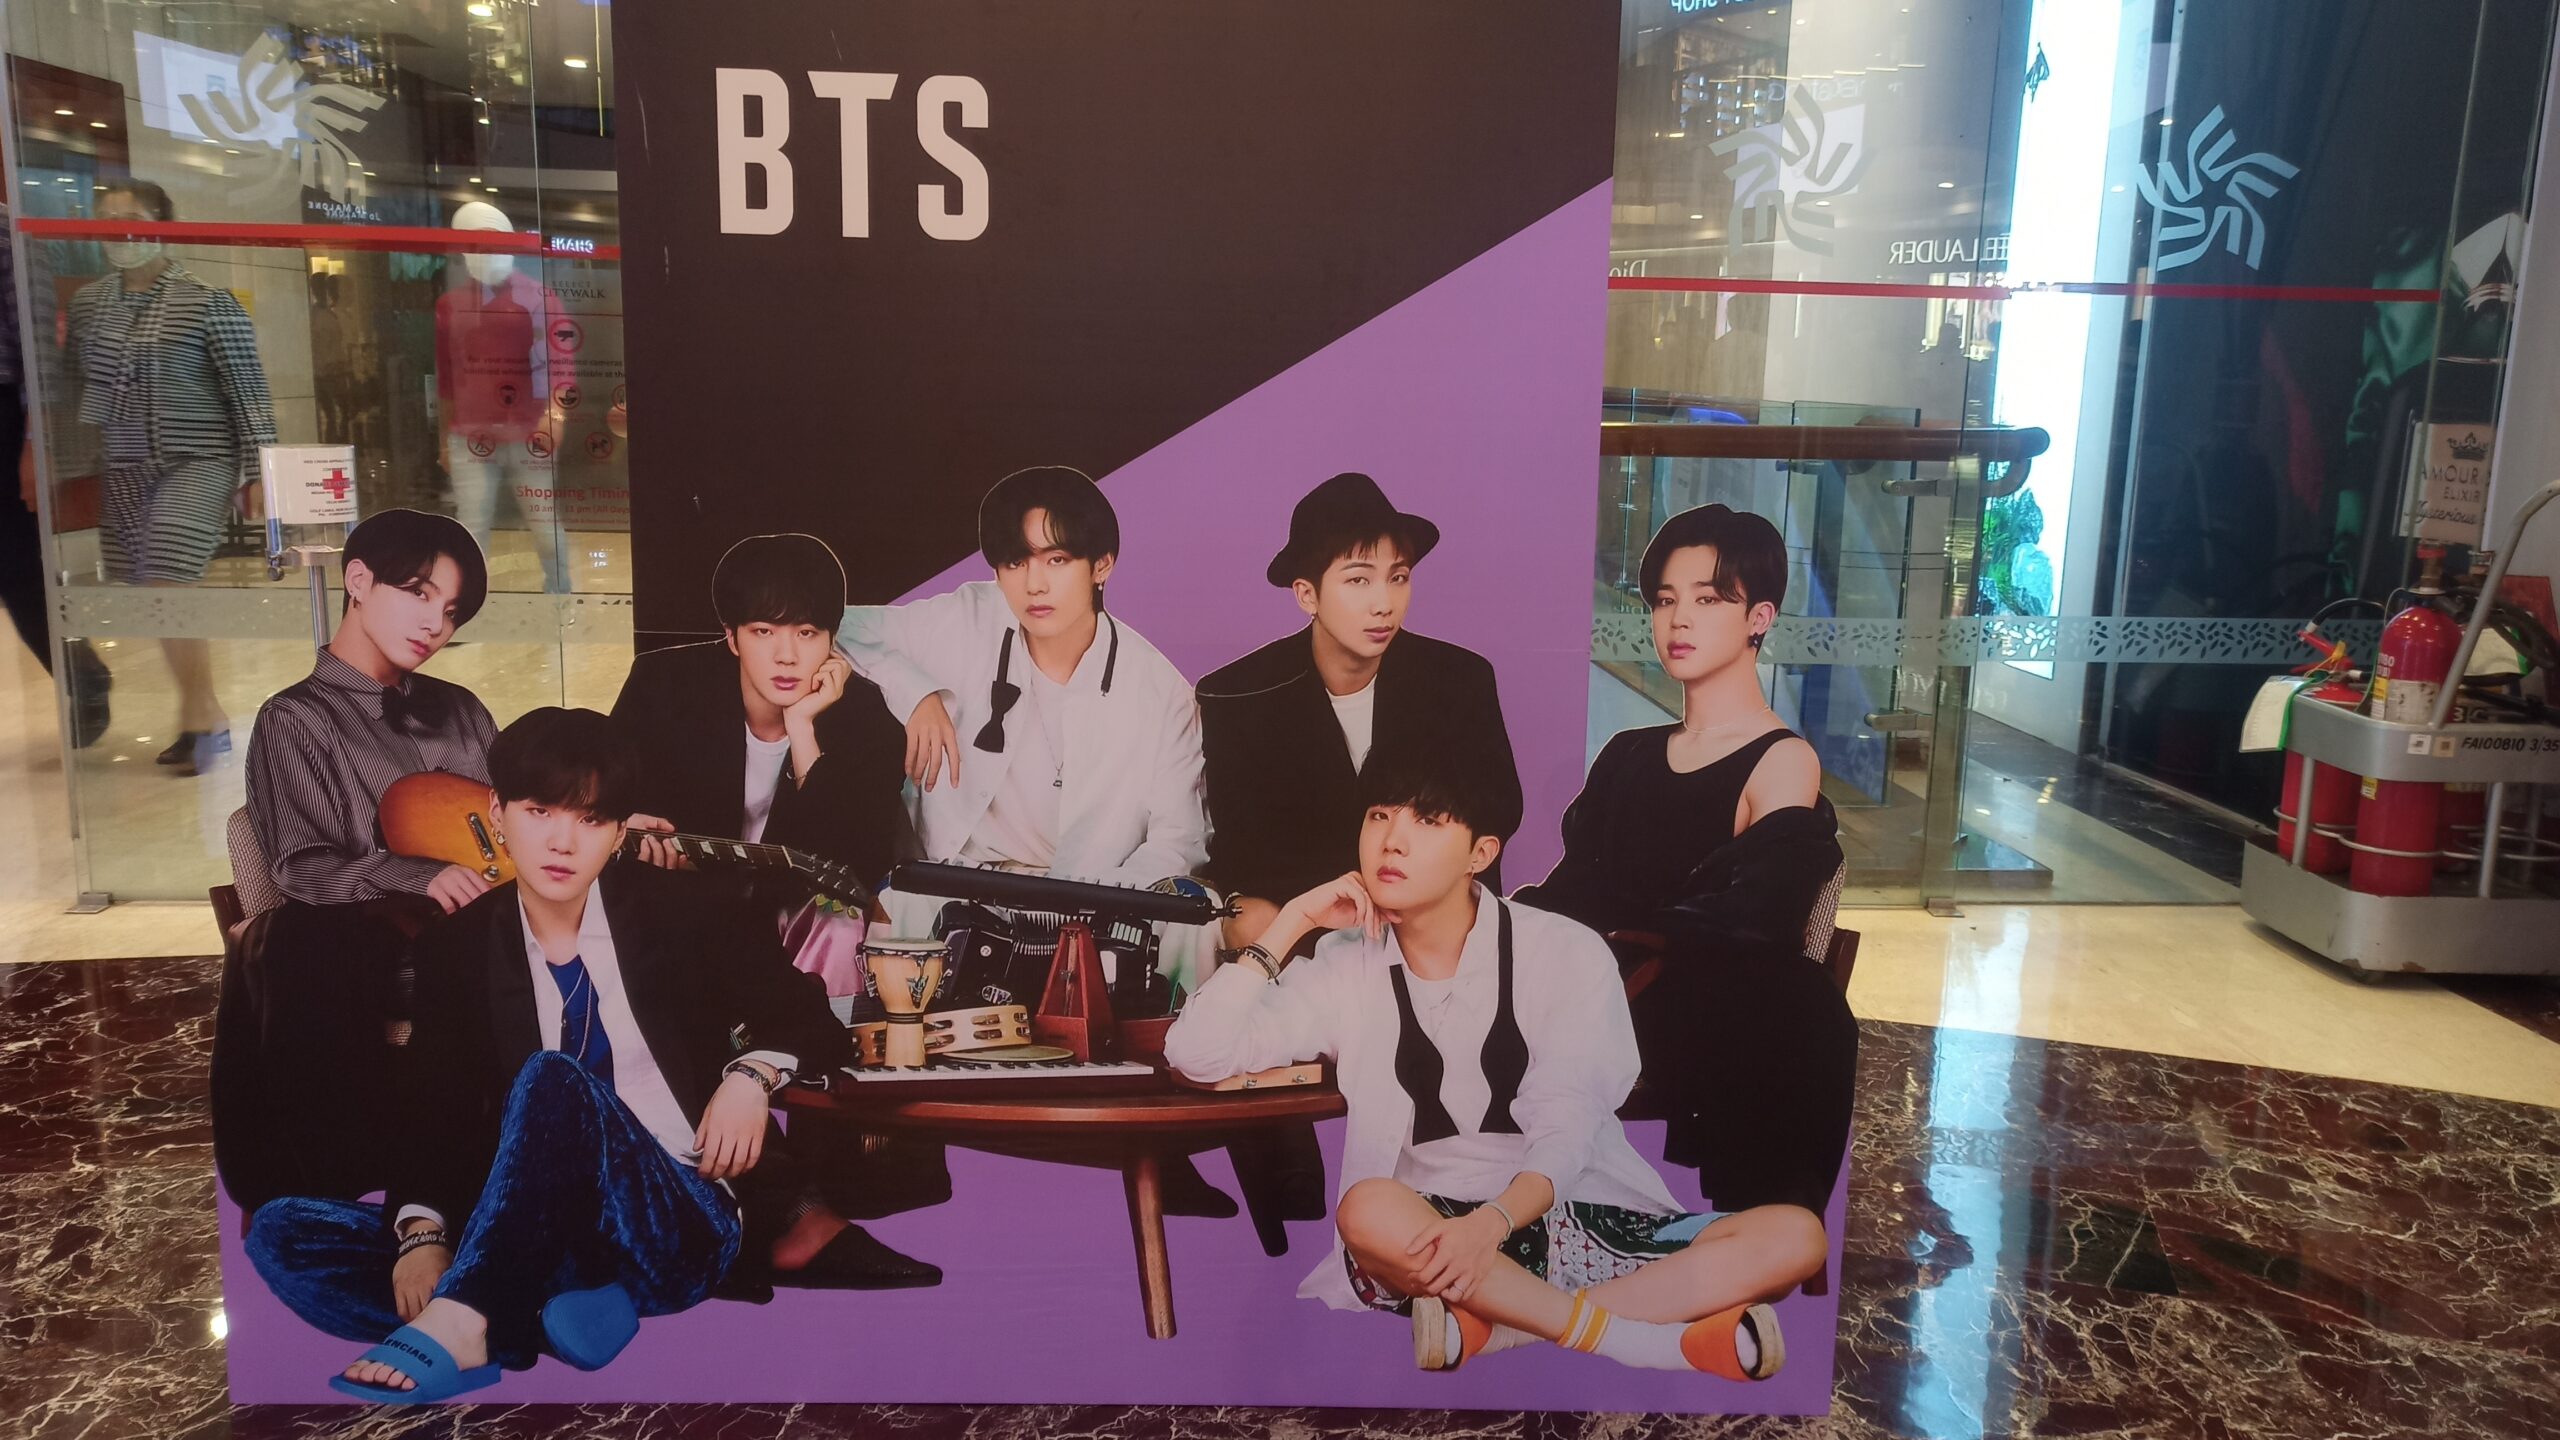 Korean Boyband BTS calls for racial equality and moral values